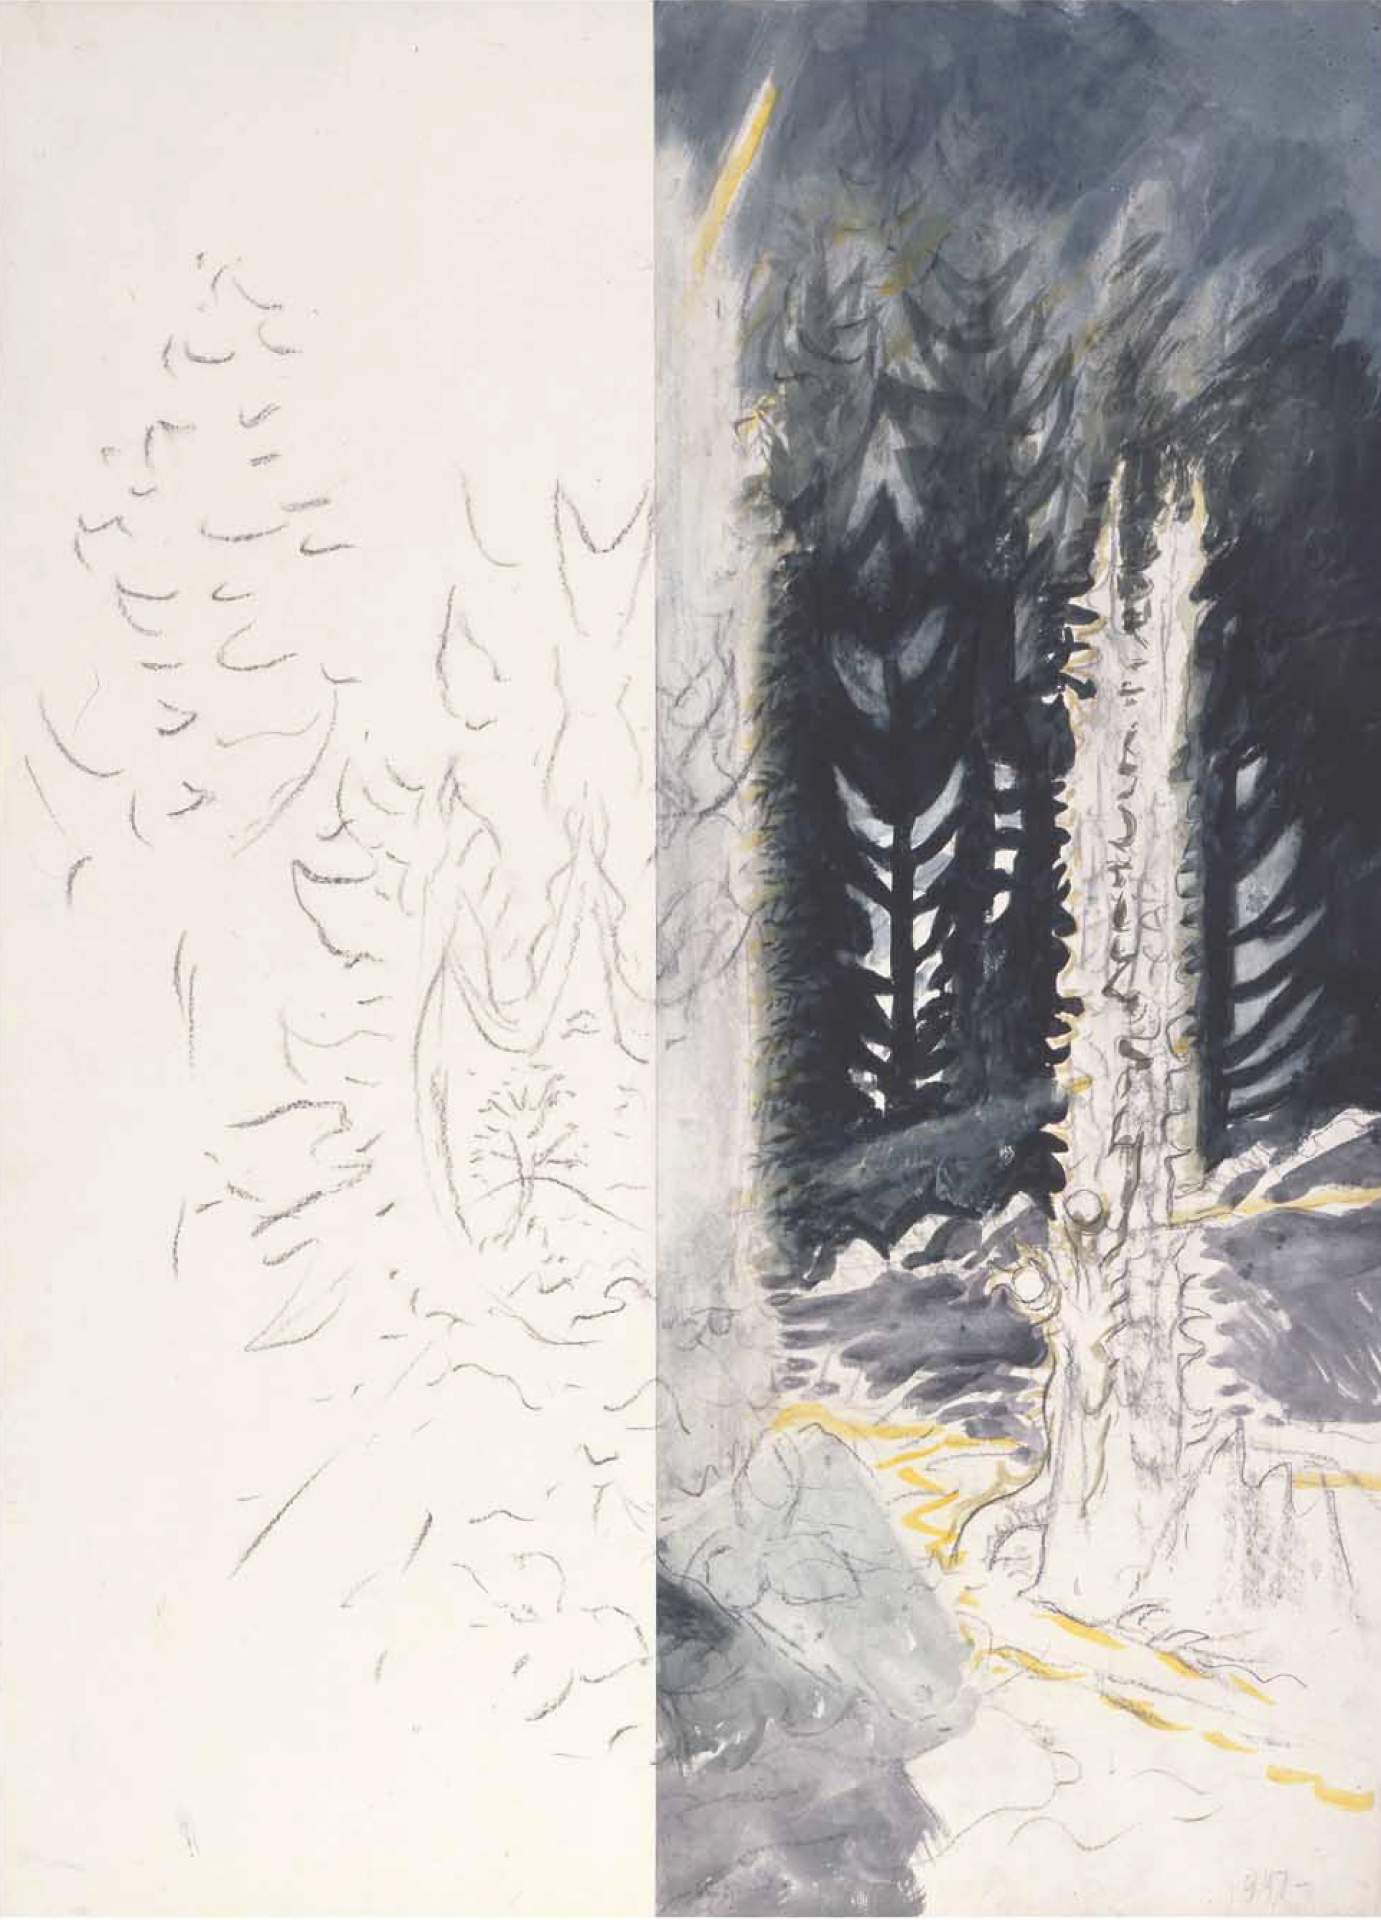 Charles E. Burchfield: Think About the Medium